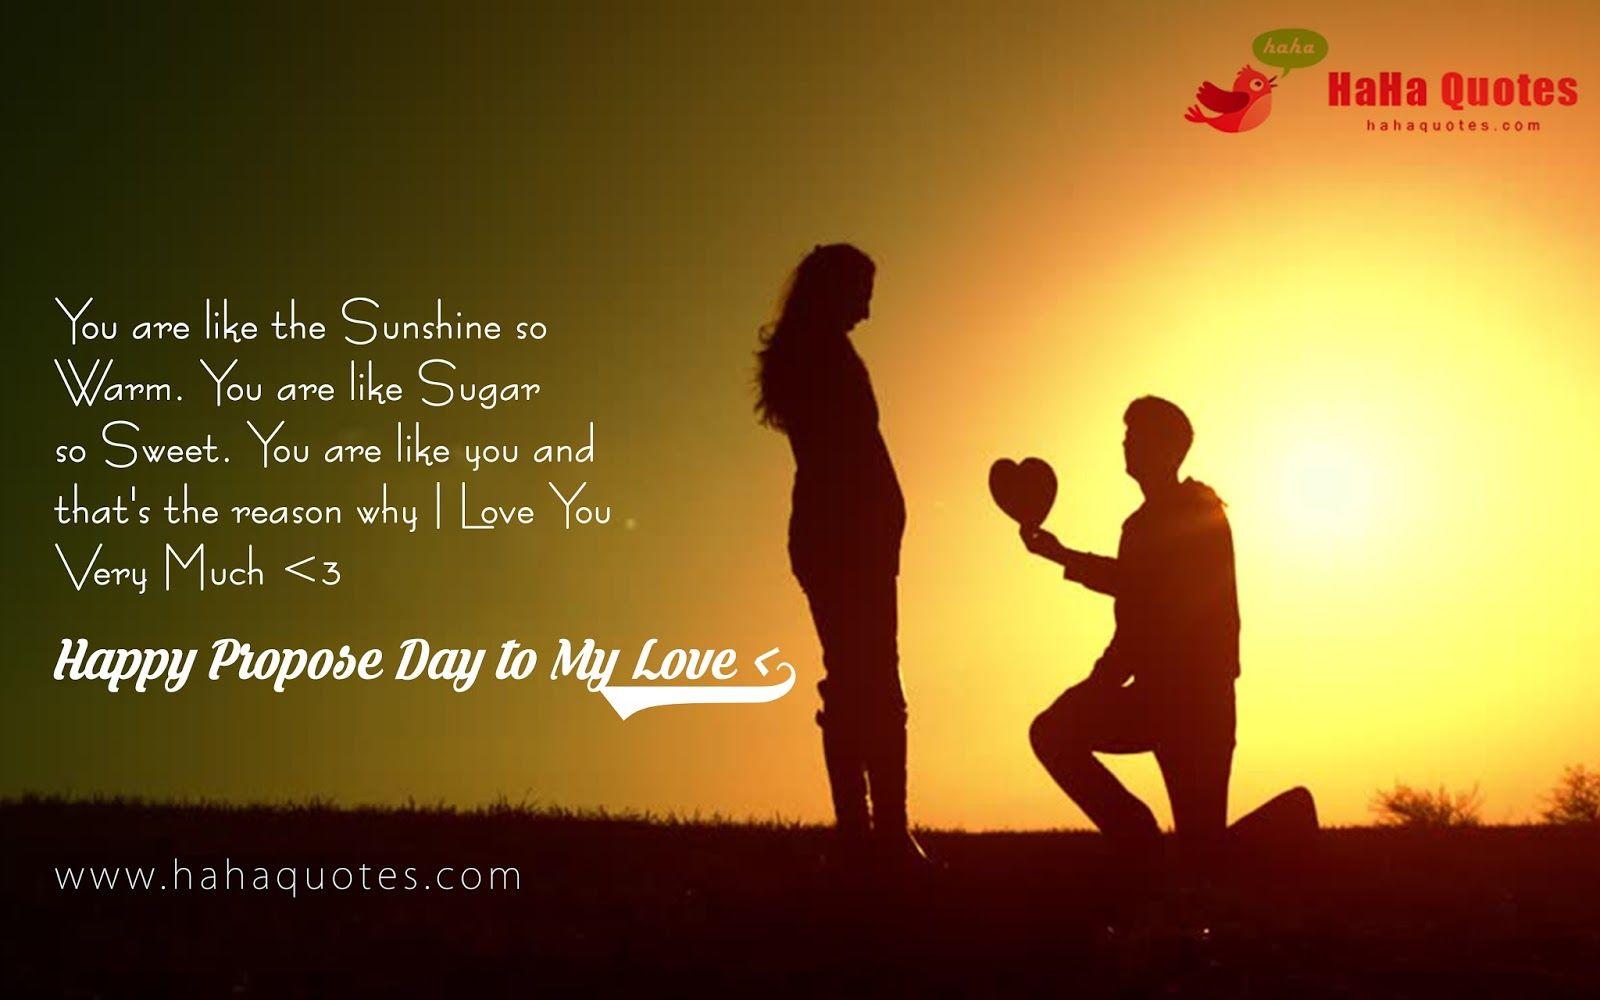 Romantic Happy Propose Day 2017 Image, HD Wallpaper, Picture